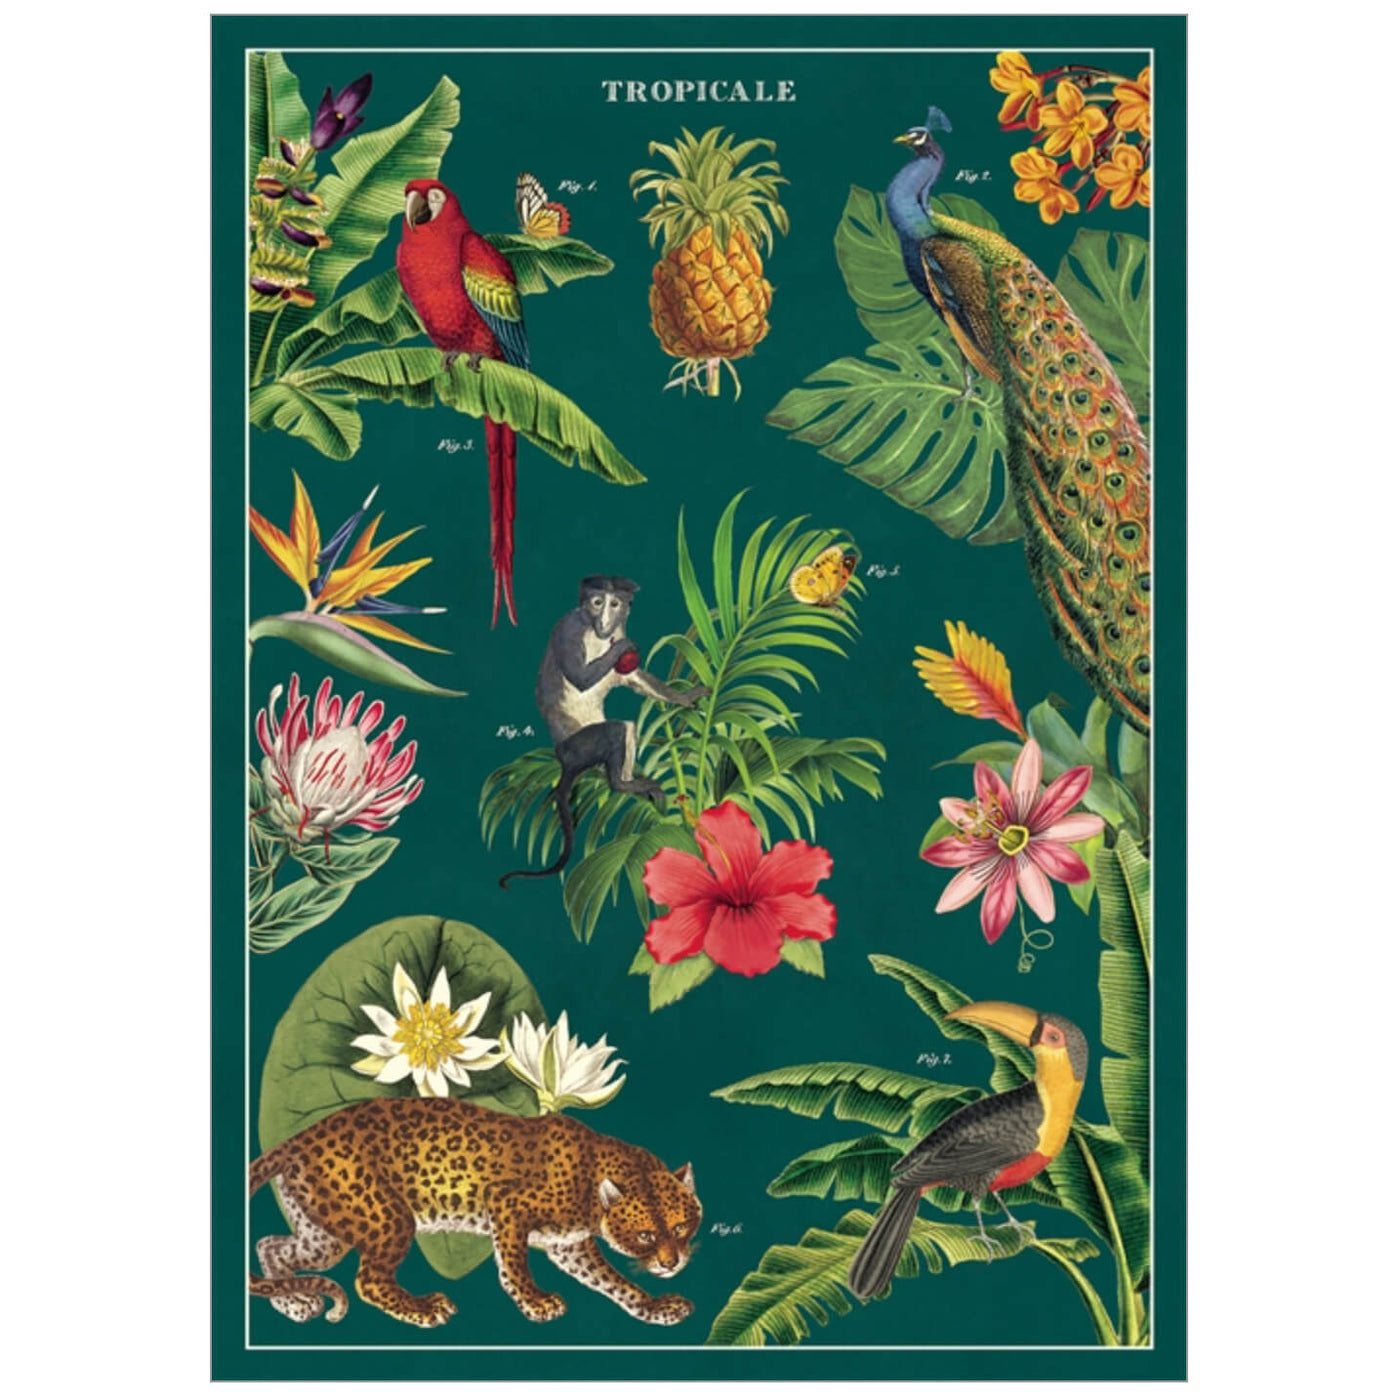 Sheet of wrap or poster with a tropical design featuring monkeys and leopards